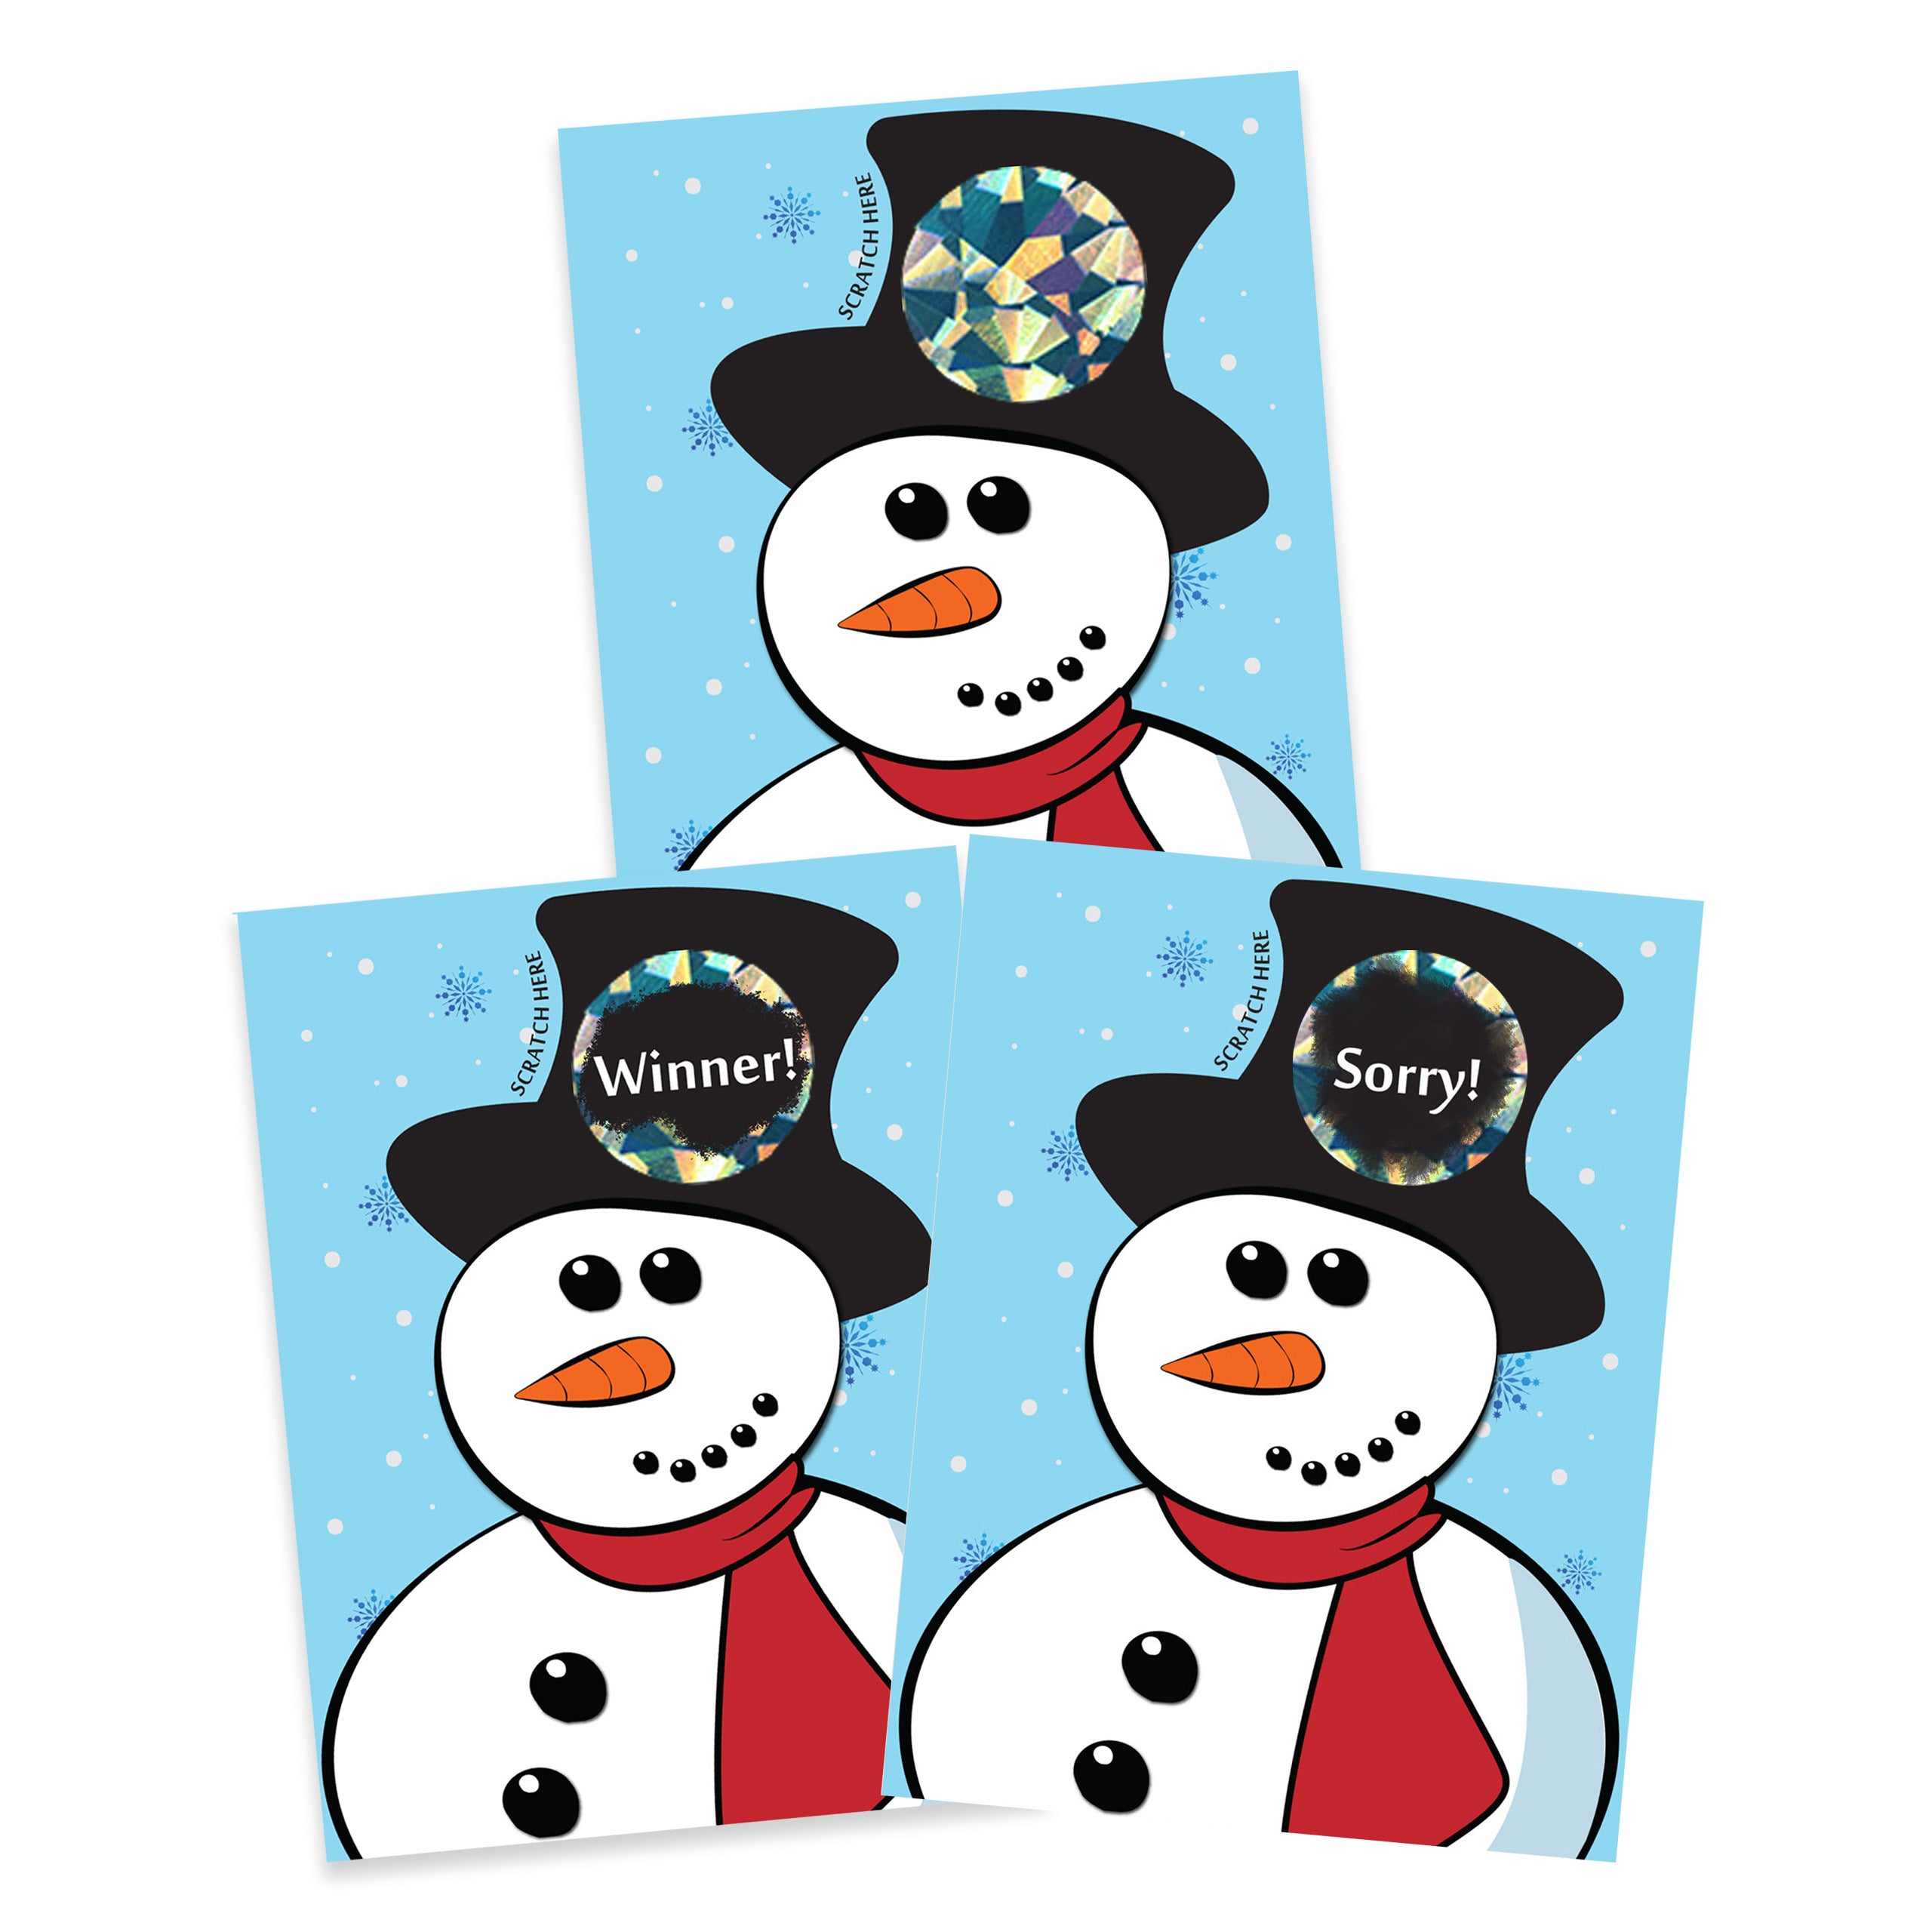 Snowman Scratch Off Game Card 26 Pack - 2 Winning and 24 Non-Winning Cards